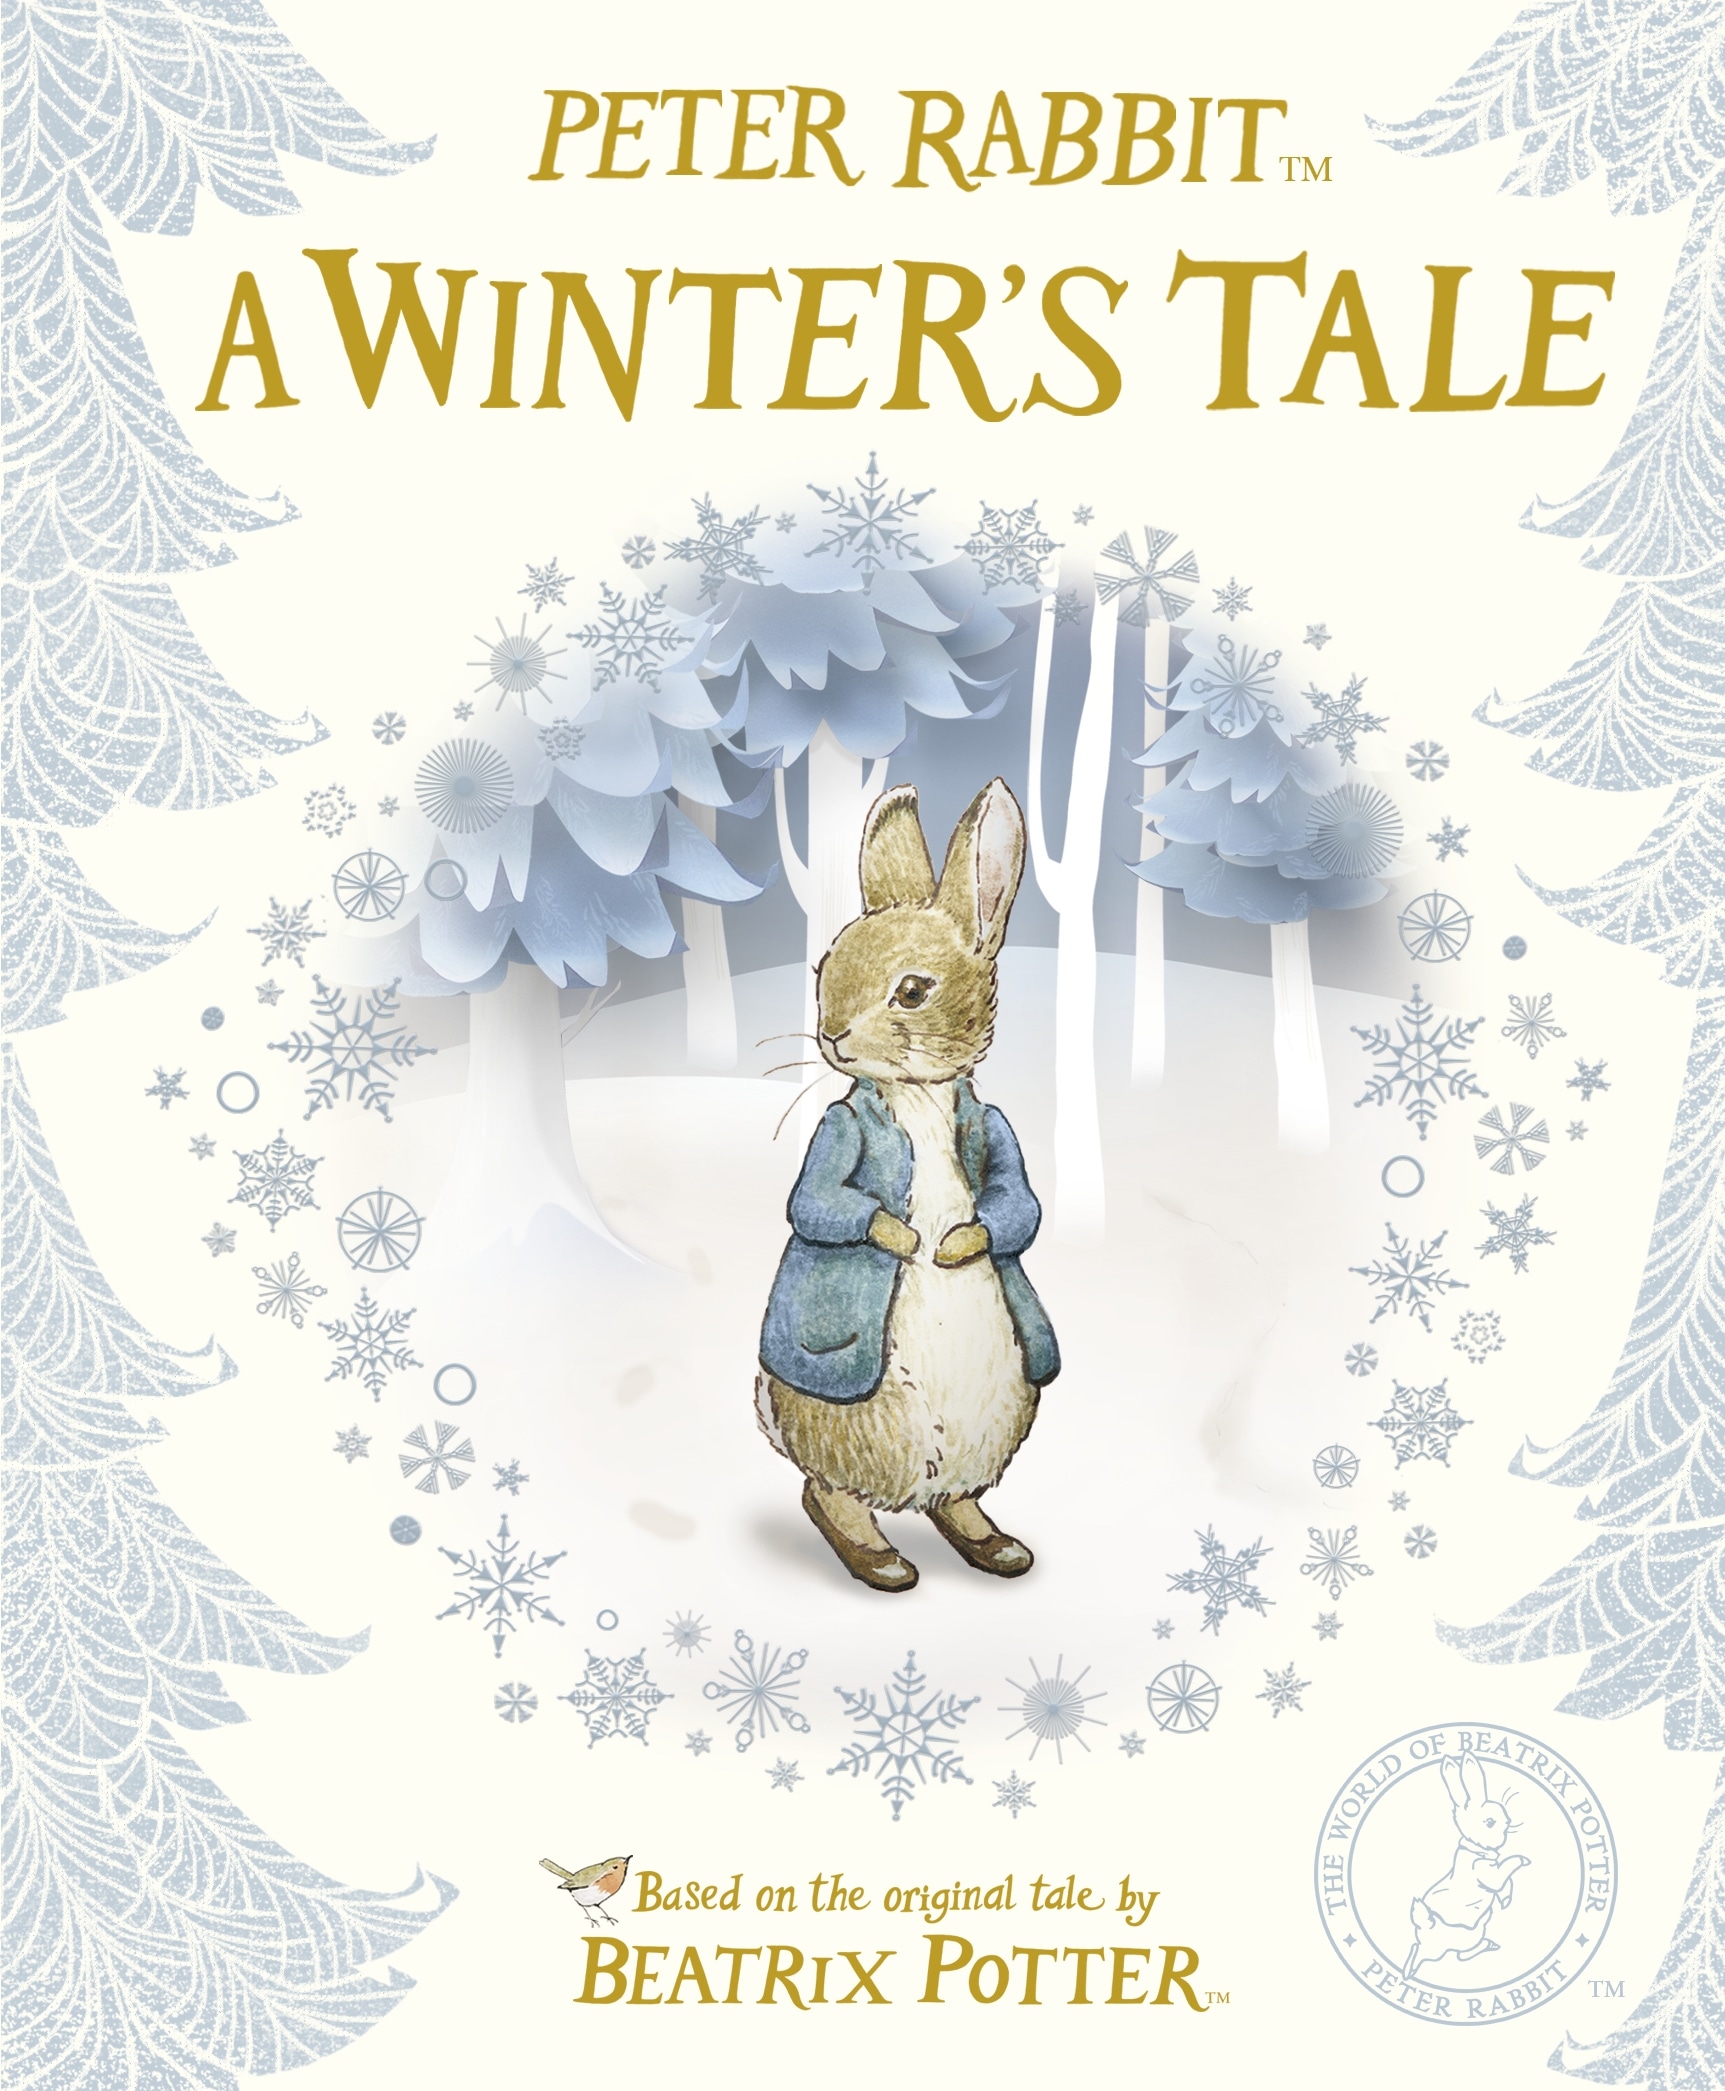 Book “Peter Rabbit: A Winter's Tale” by Beatrix Potter — October 4, 2018